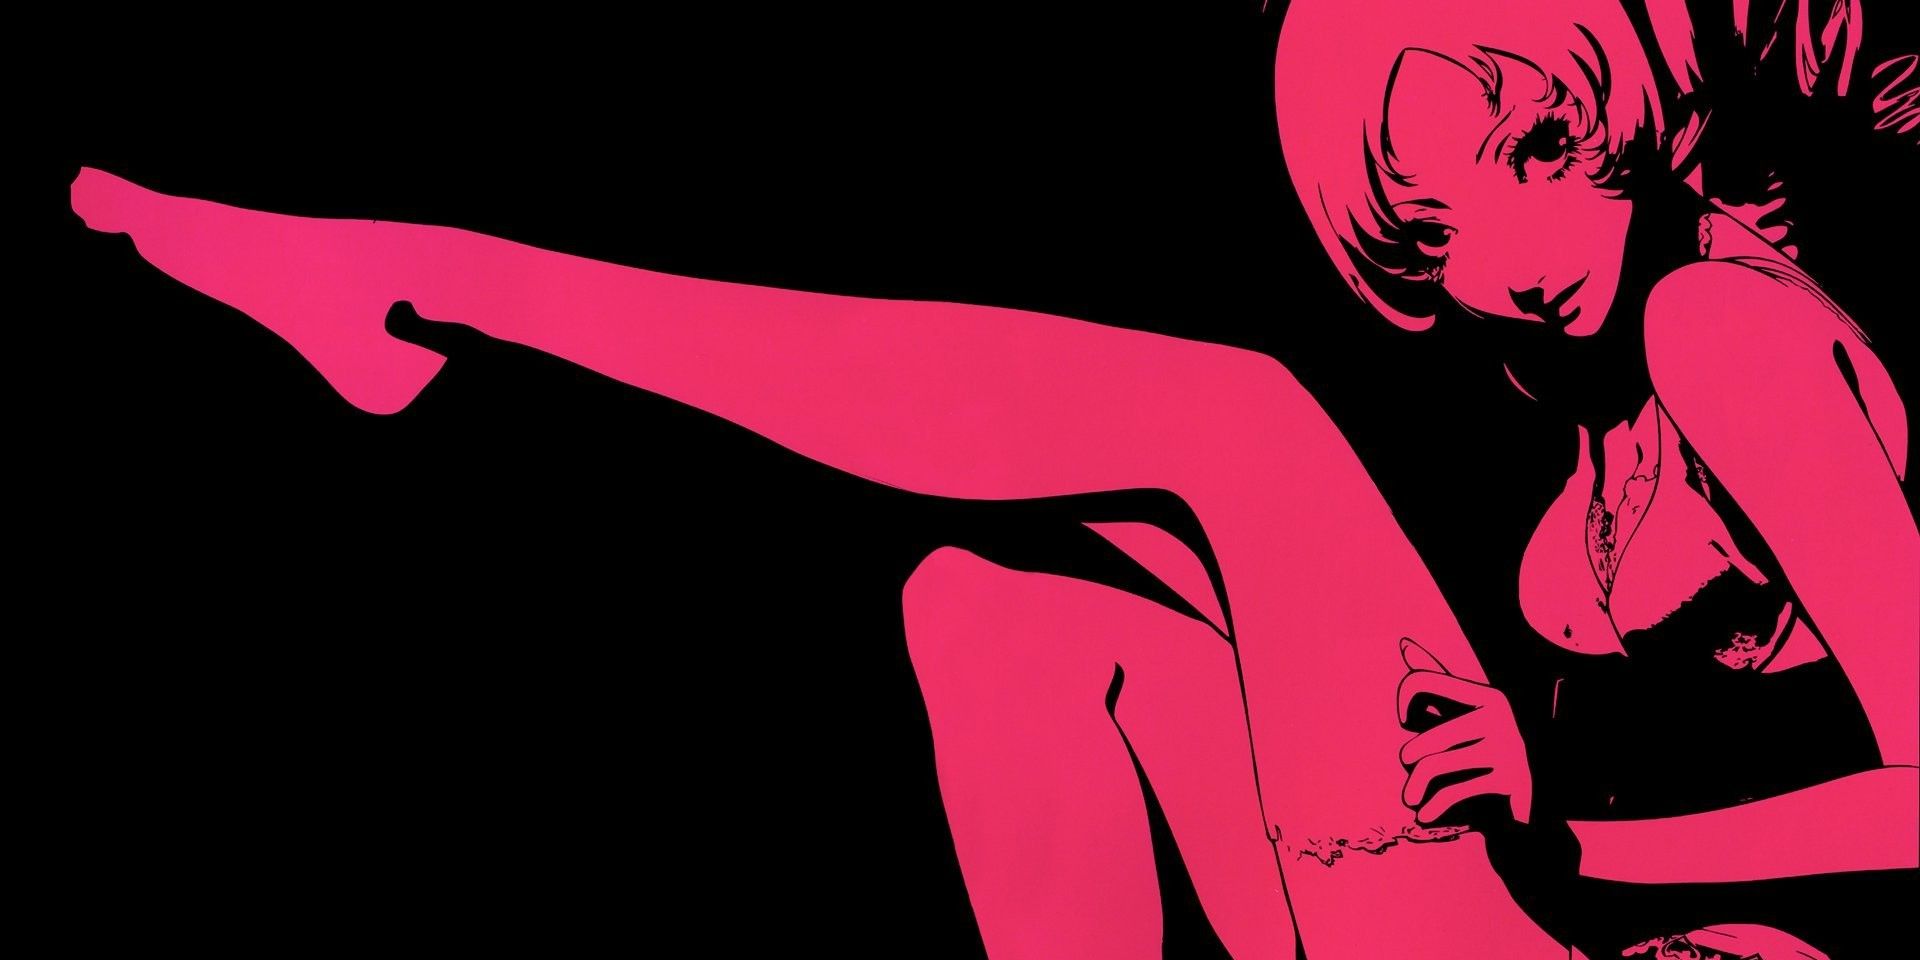 Catherine Full Body May Not Actually Take Place On Earth